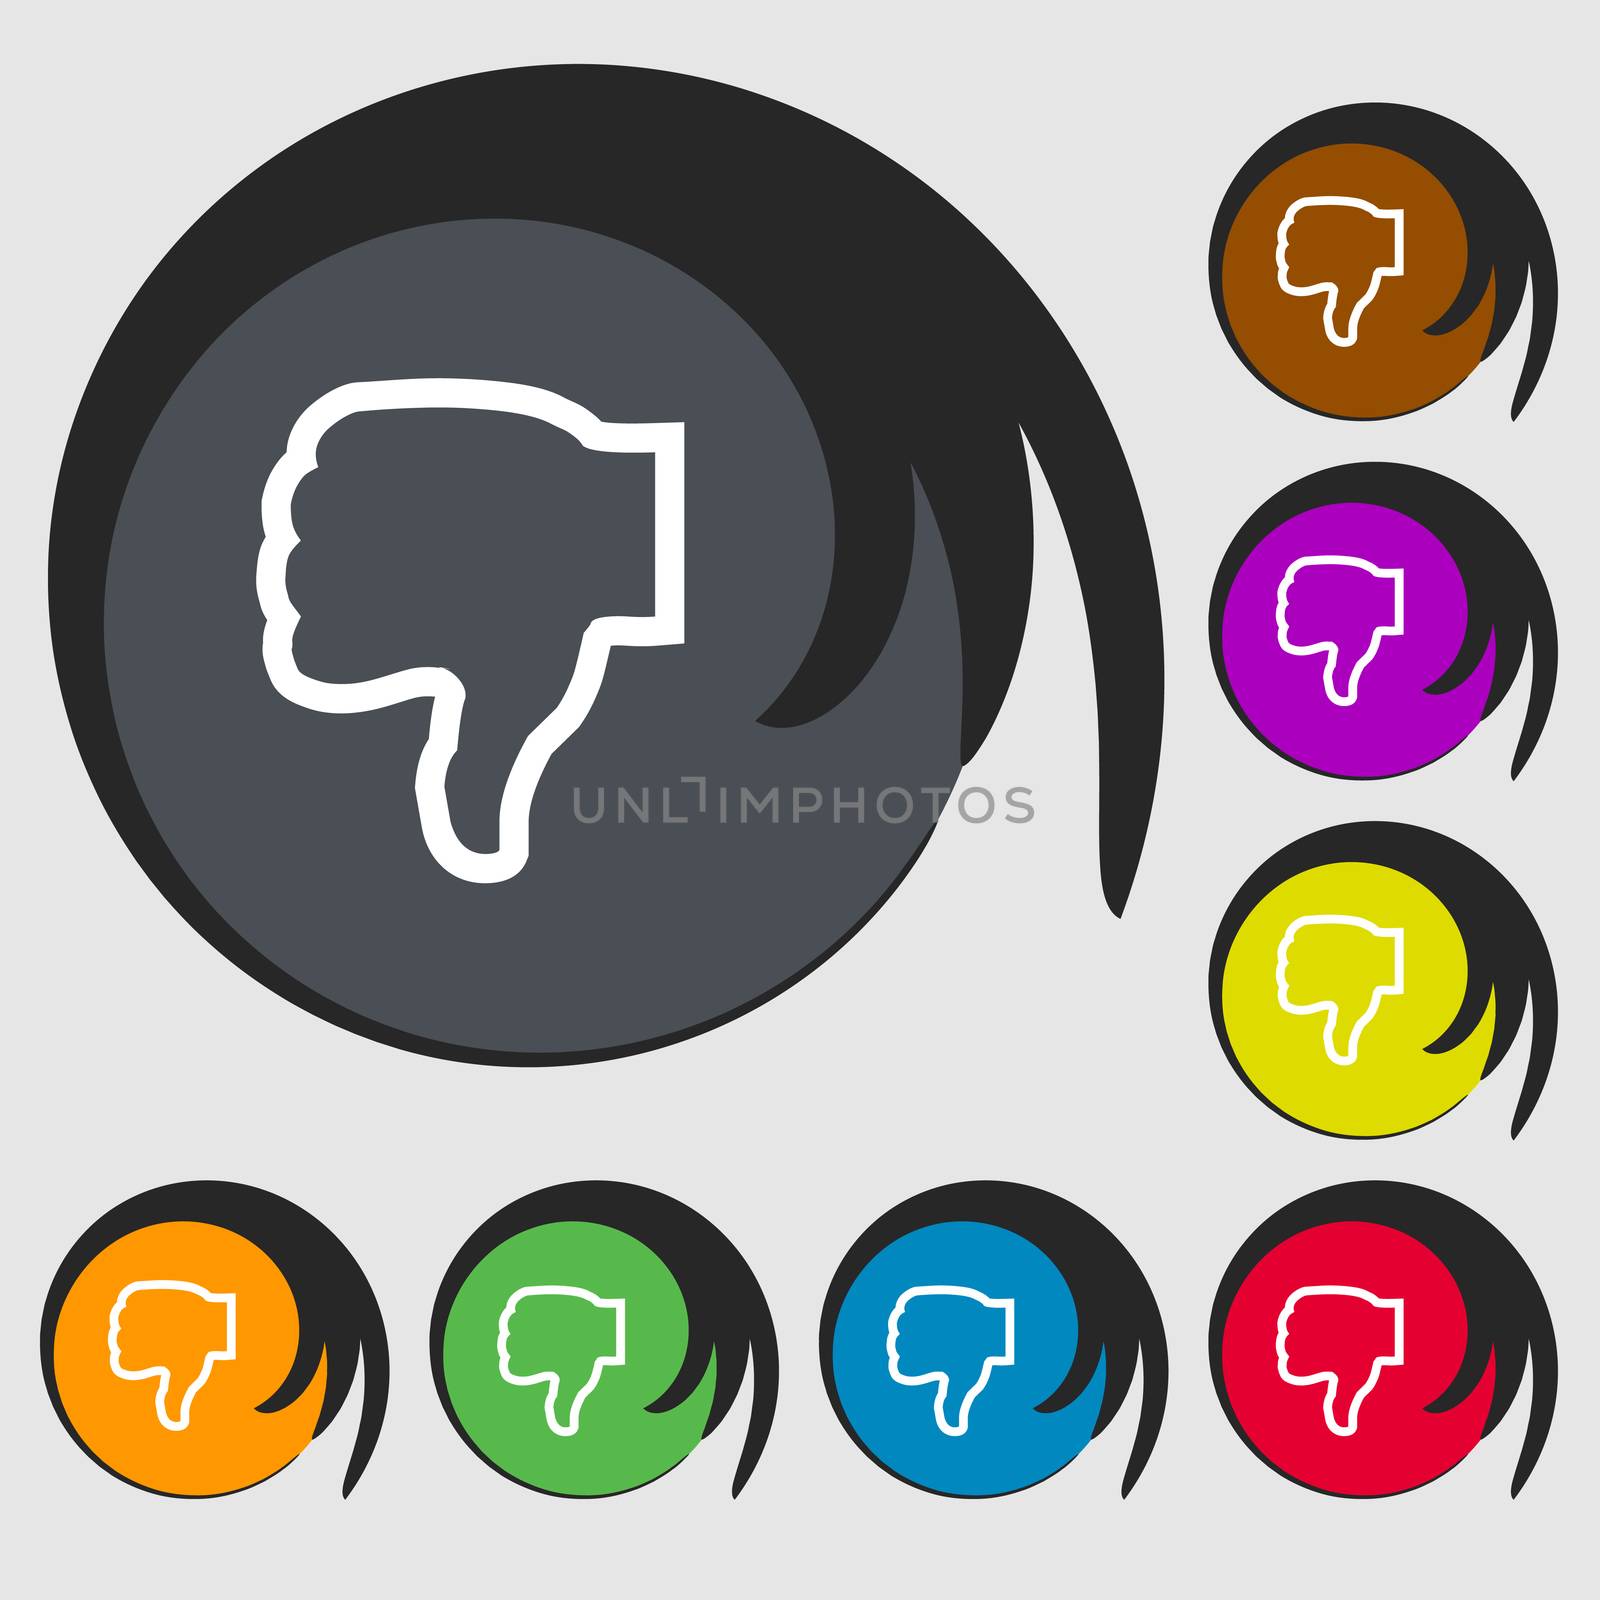 Dislike icon sign. Symbol on eight colored buttons. illustration